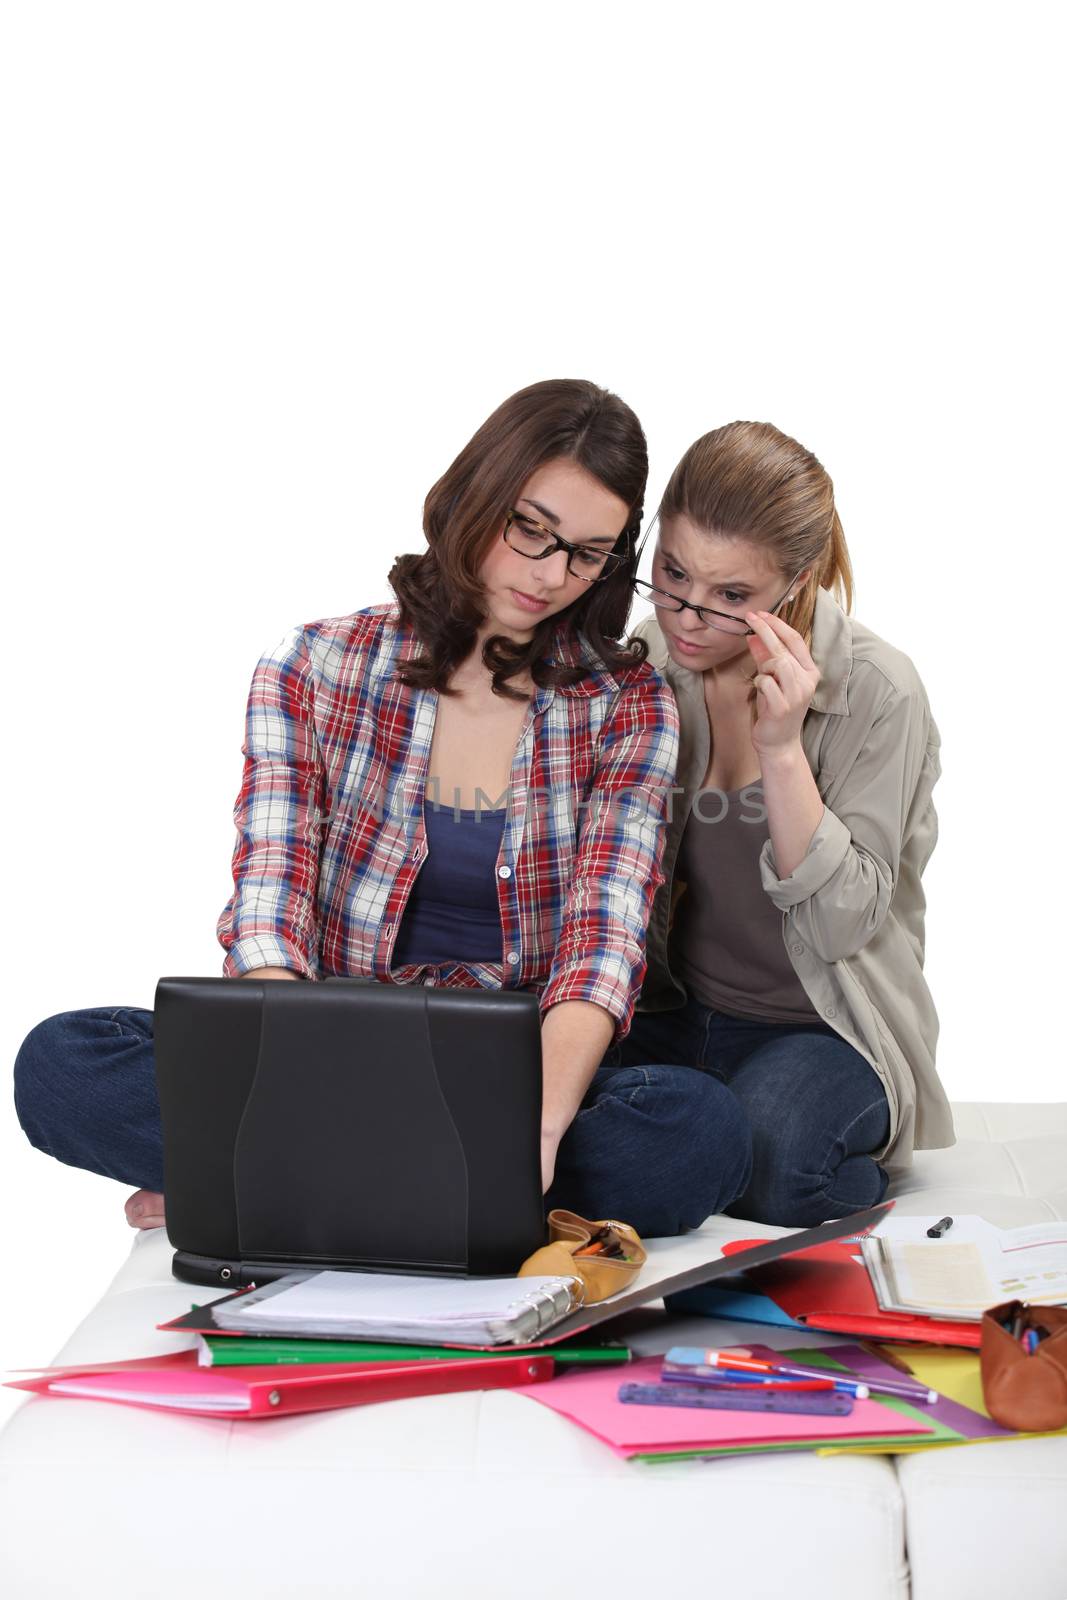 Female students working at a laptop